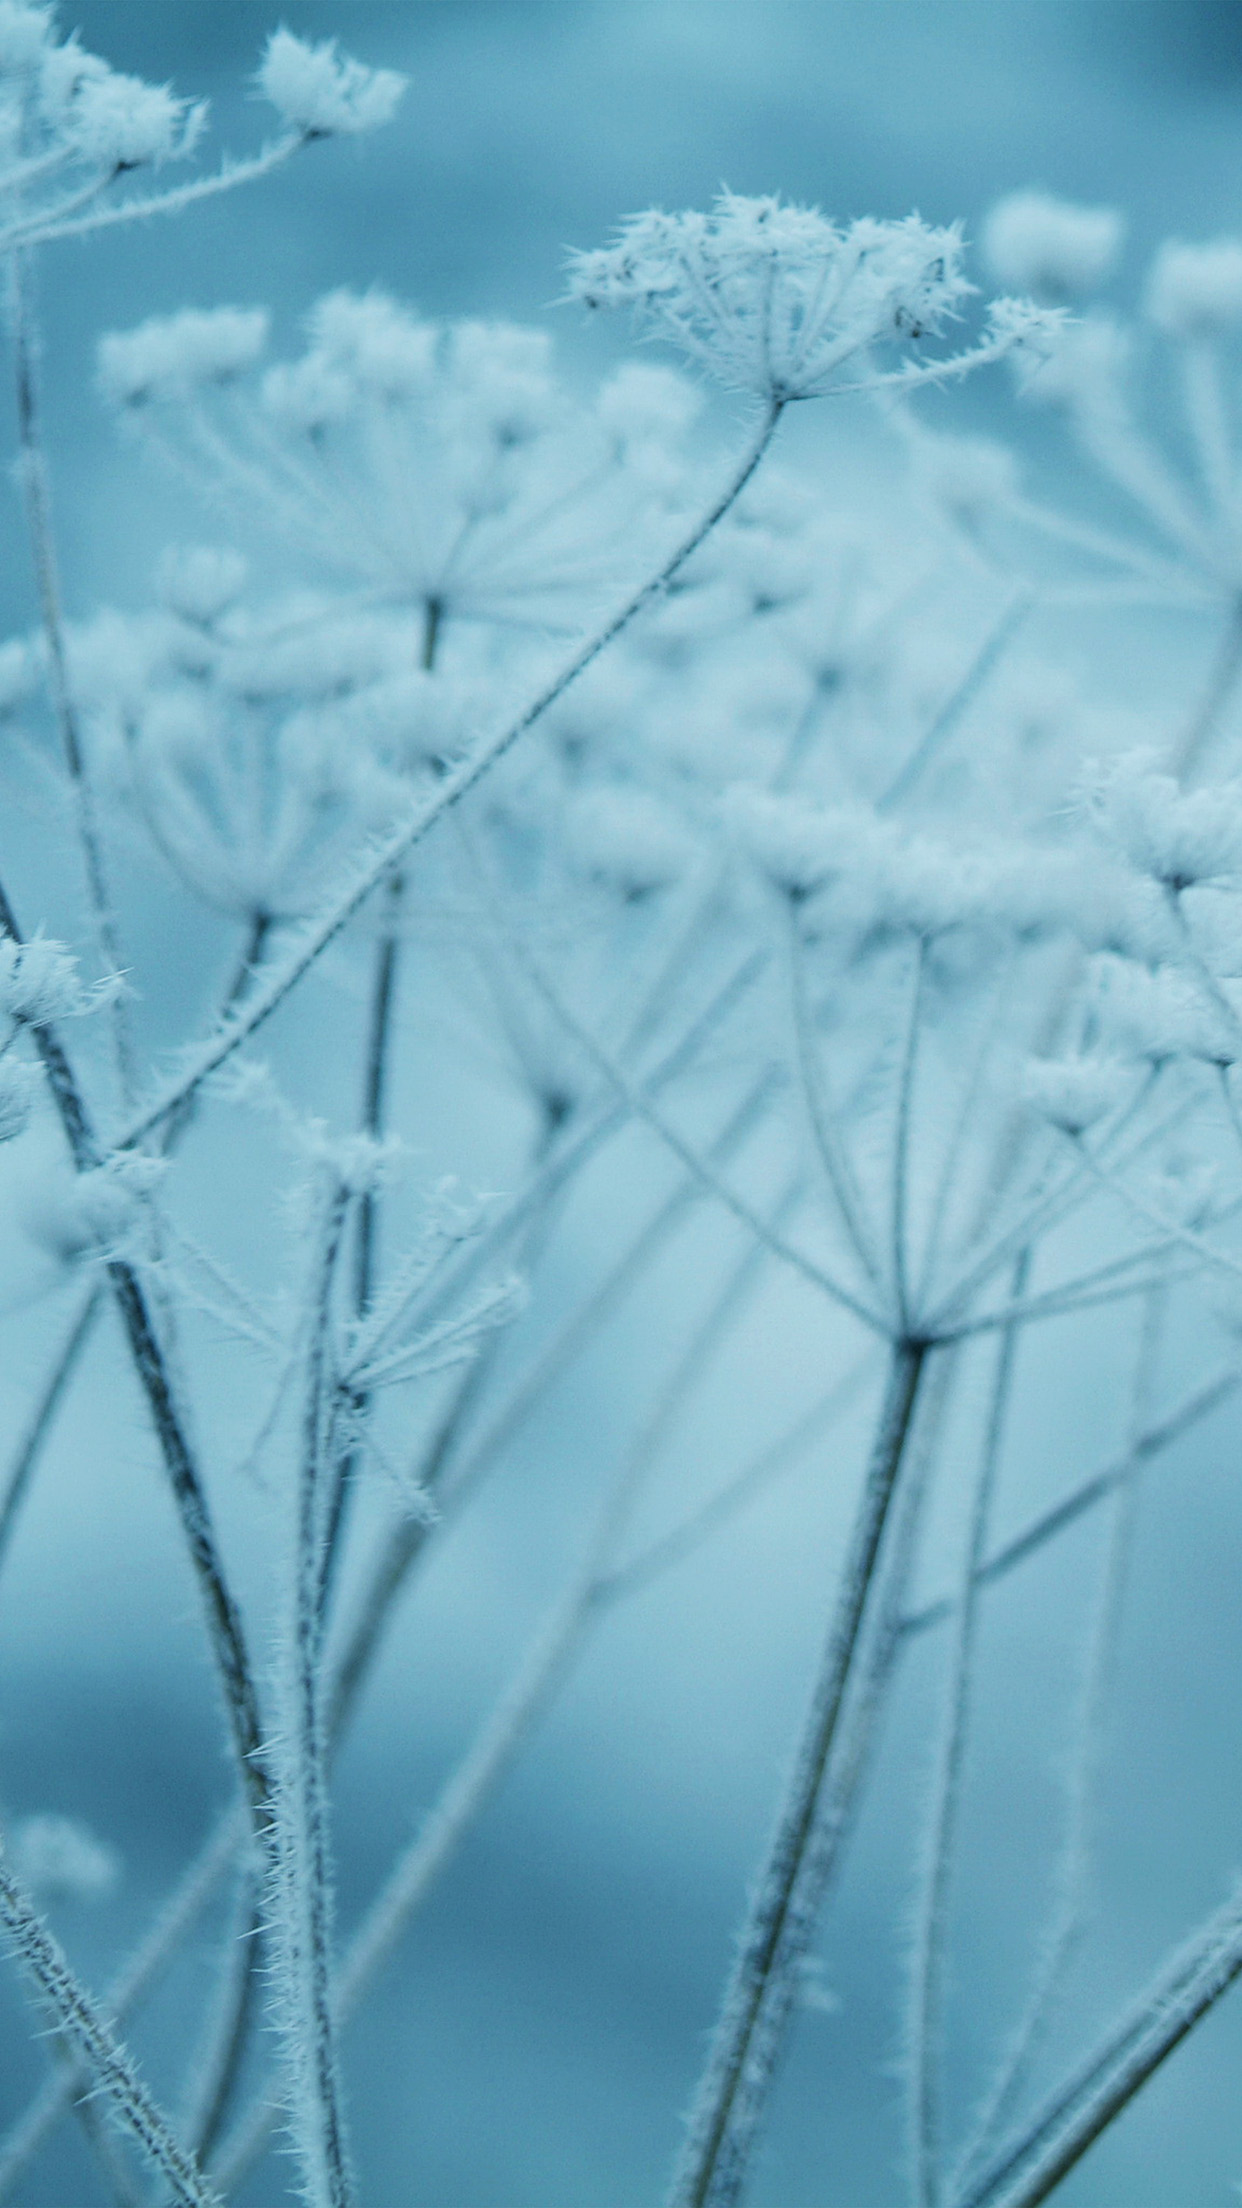 Ipad Snow Winter Flower Blue Nature Bokeh Android wallpaper